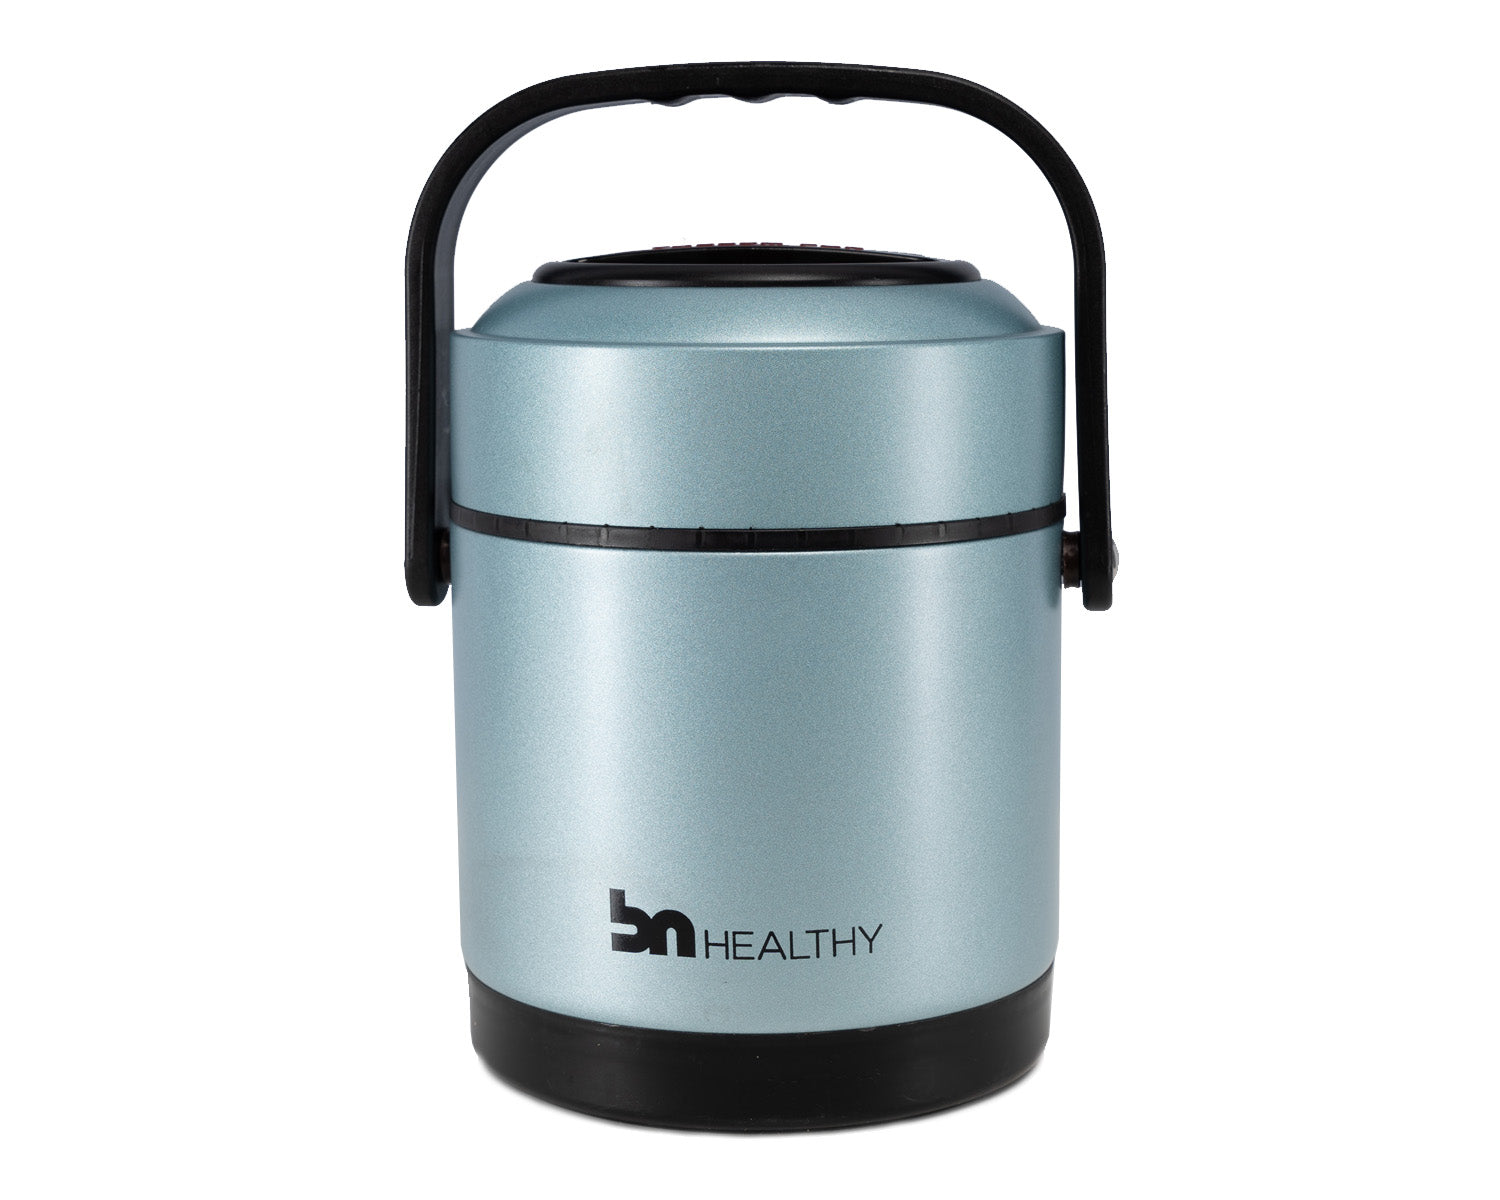 BN Thermos 2 colours